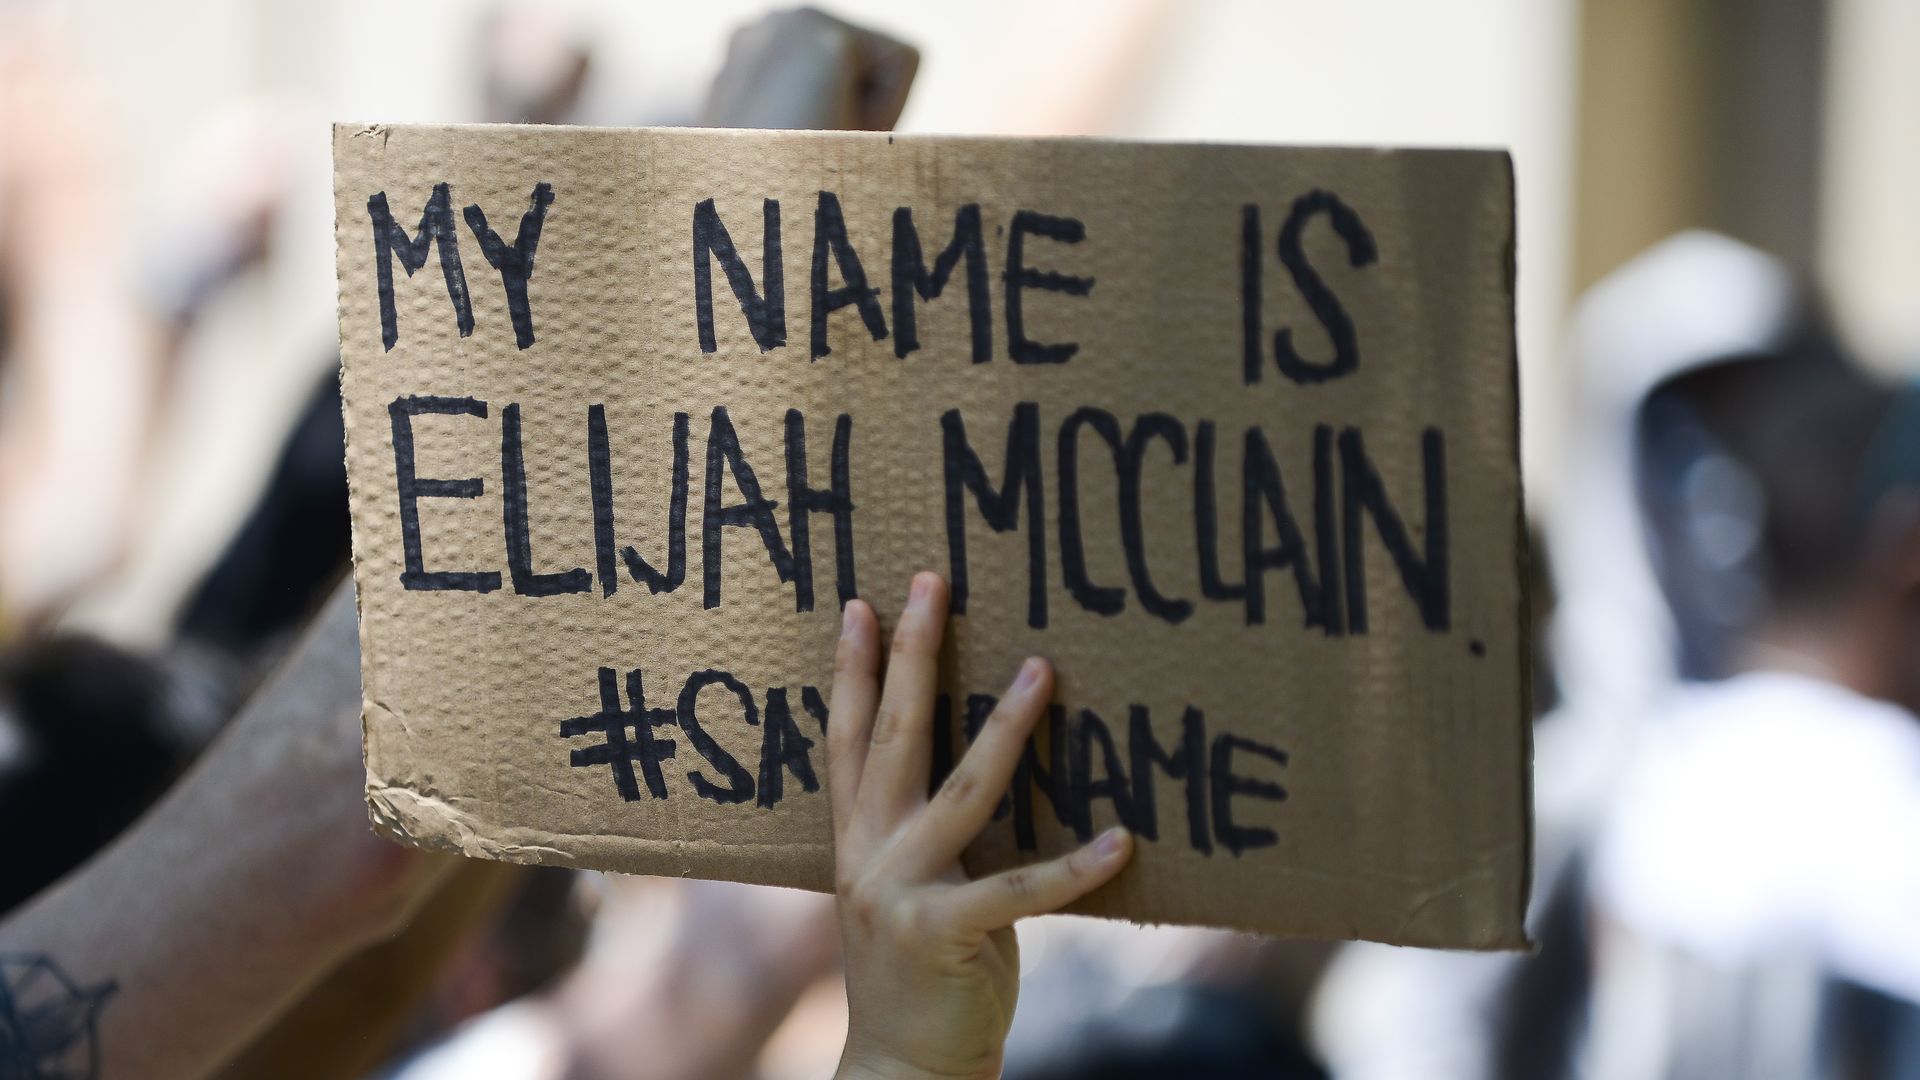 Picture of a hand holding a cardboard that says "my name is Elijah McClain"